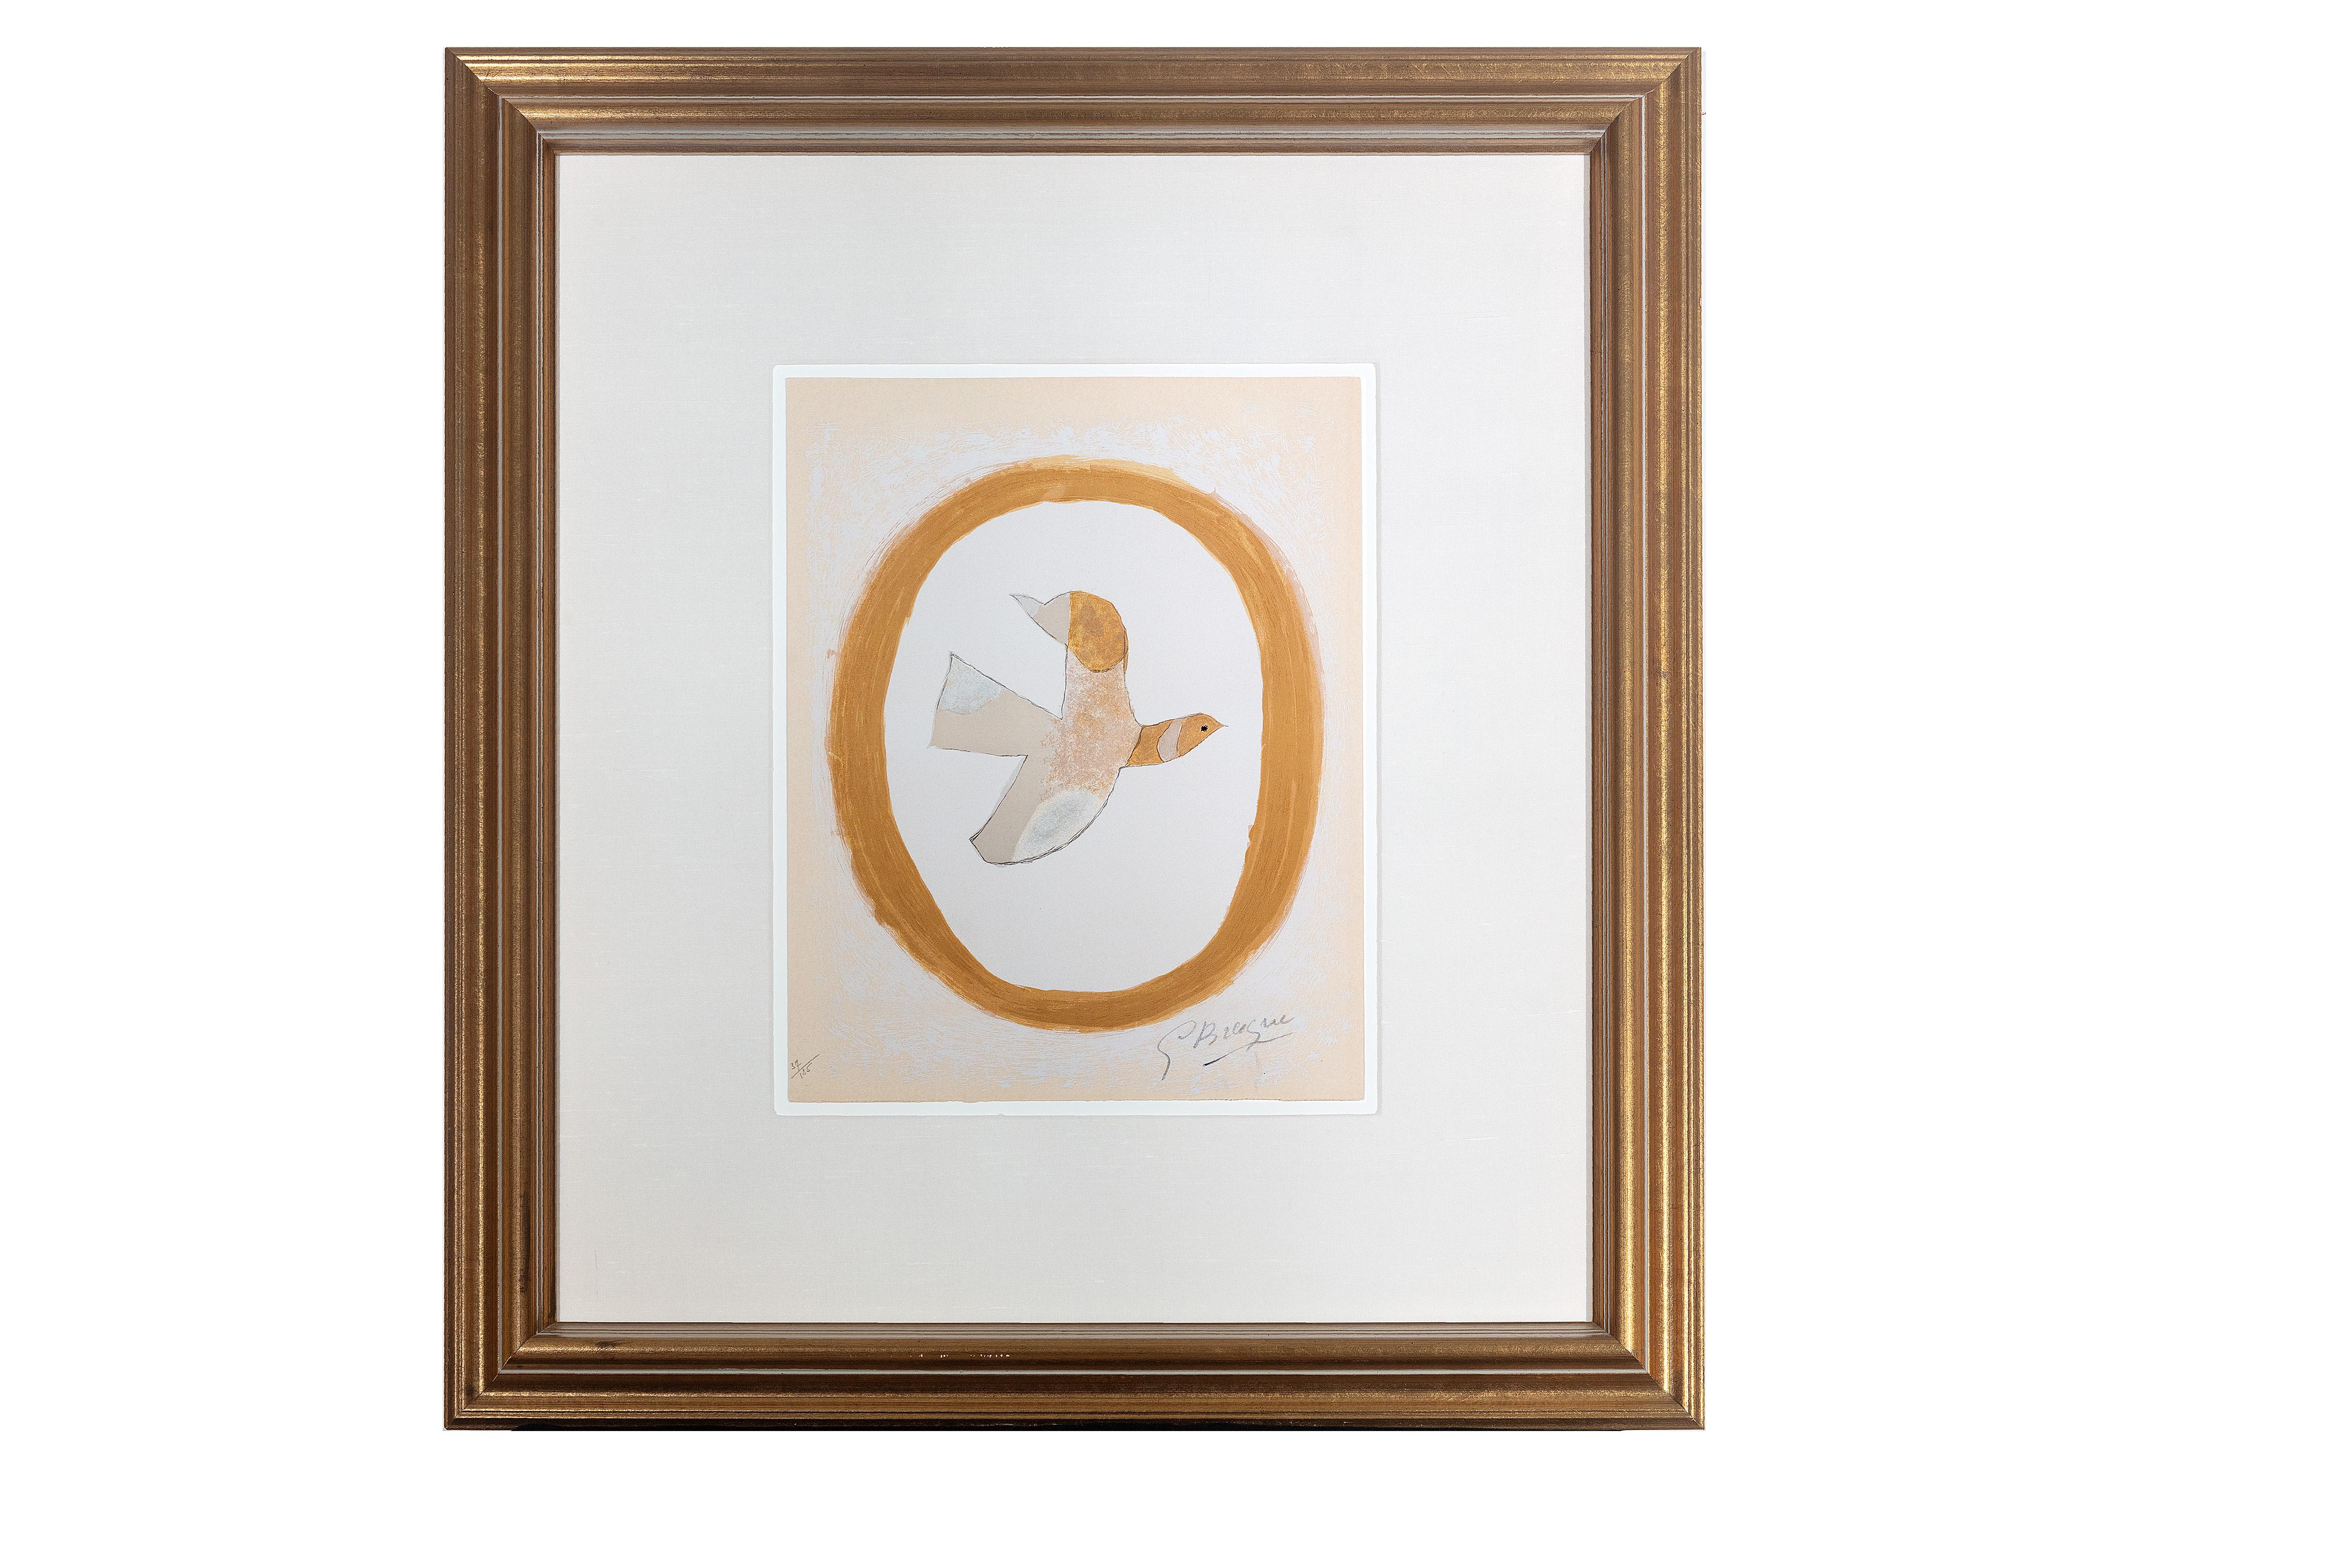 Georges Braque Animal Print - "L'oiseau de sables (Bird of the Sands)" contemporary animal bright signed 